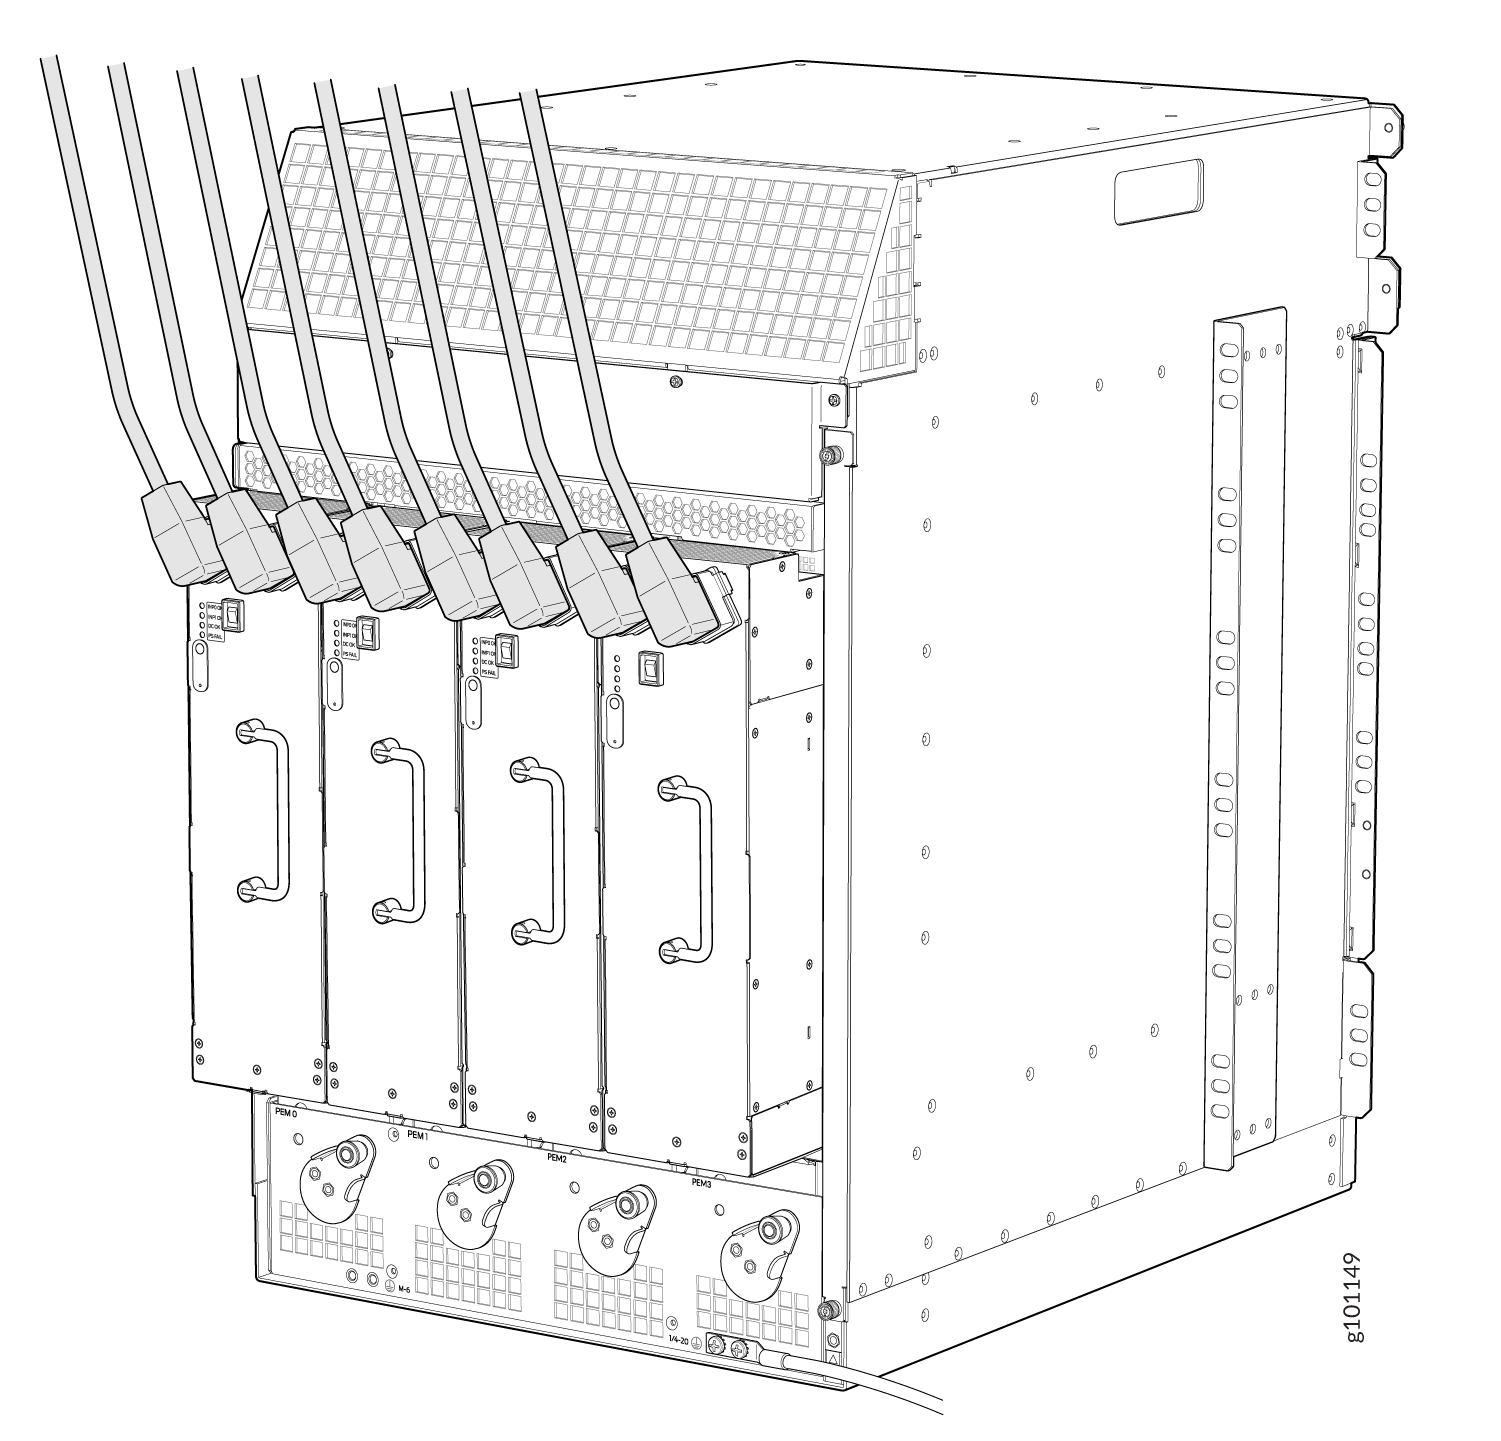 SRX5800 with Both High-Capacity Second-Generation AC Power Feeds Connected